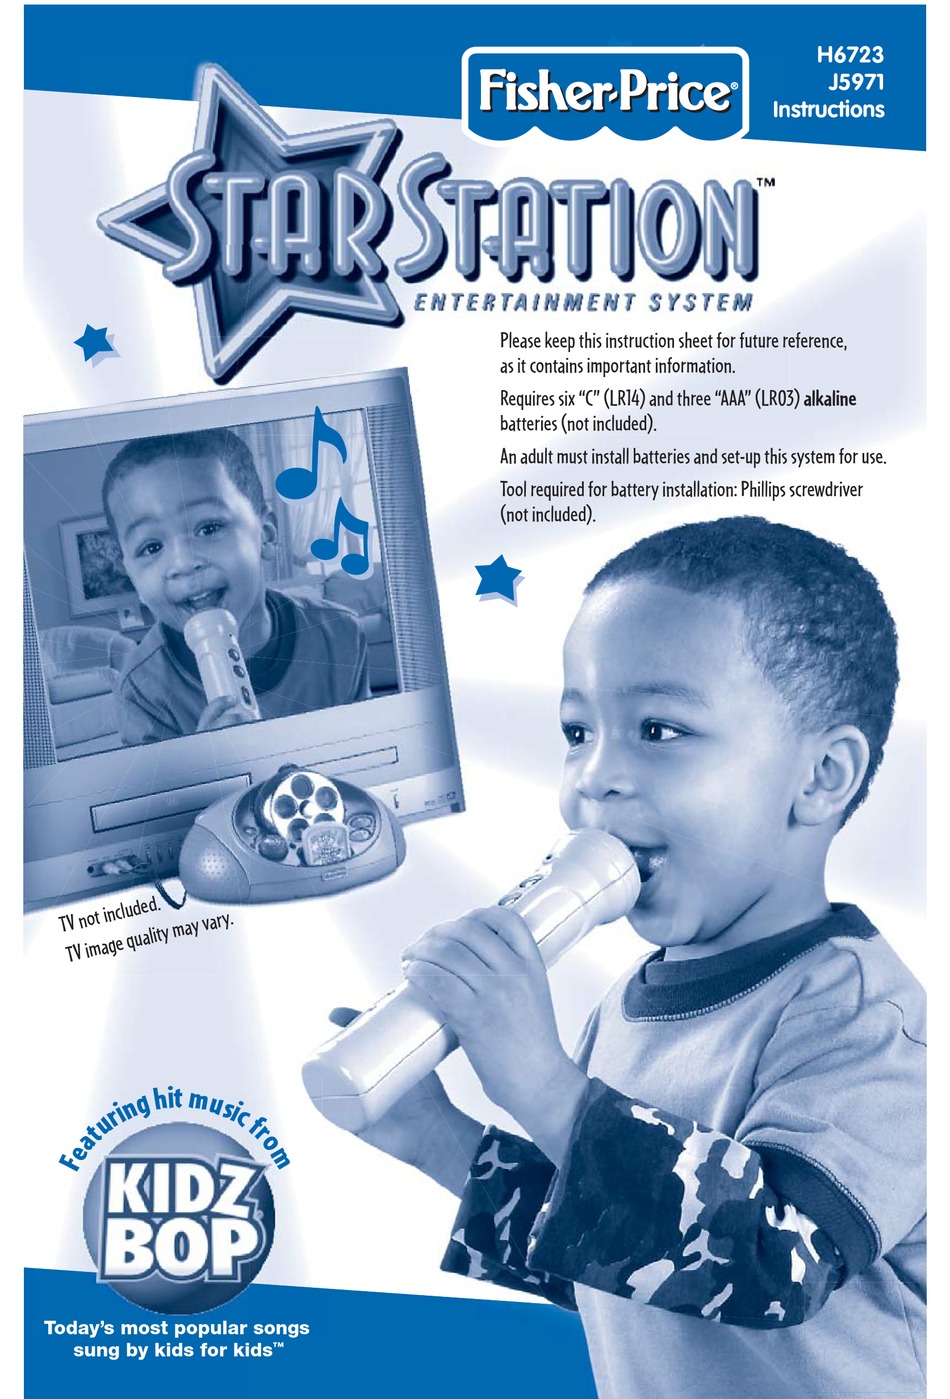 FISHER-PRICE STAR STATION H6723 INSTRUCTIONS MANUAL Pdf ...